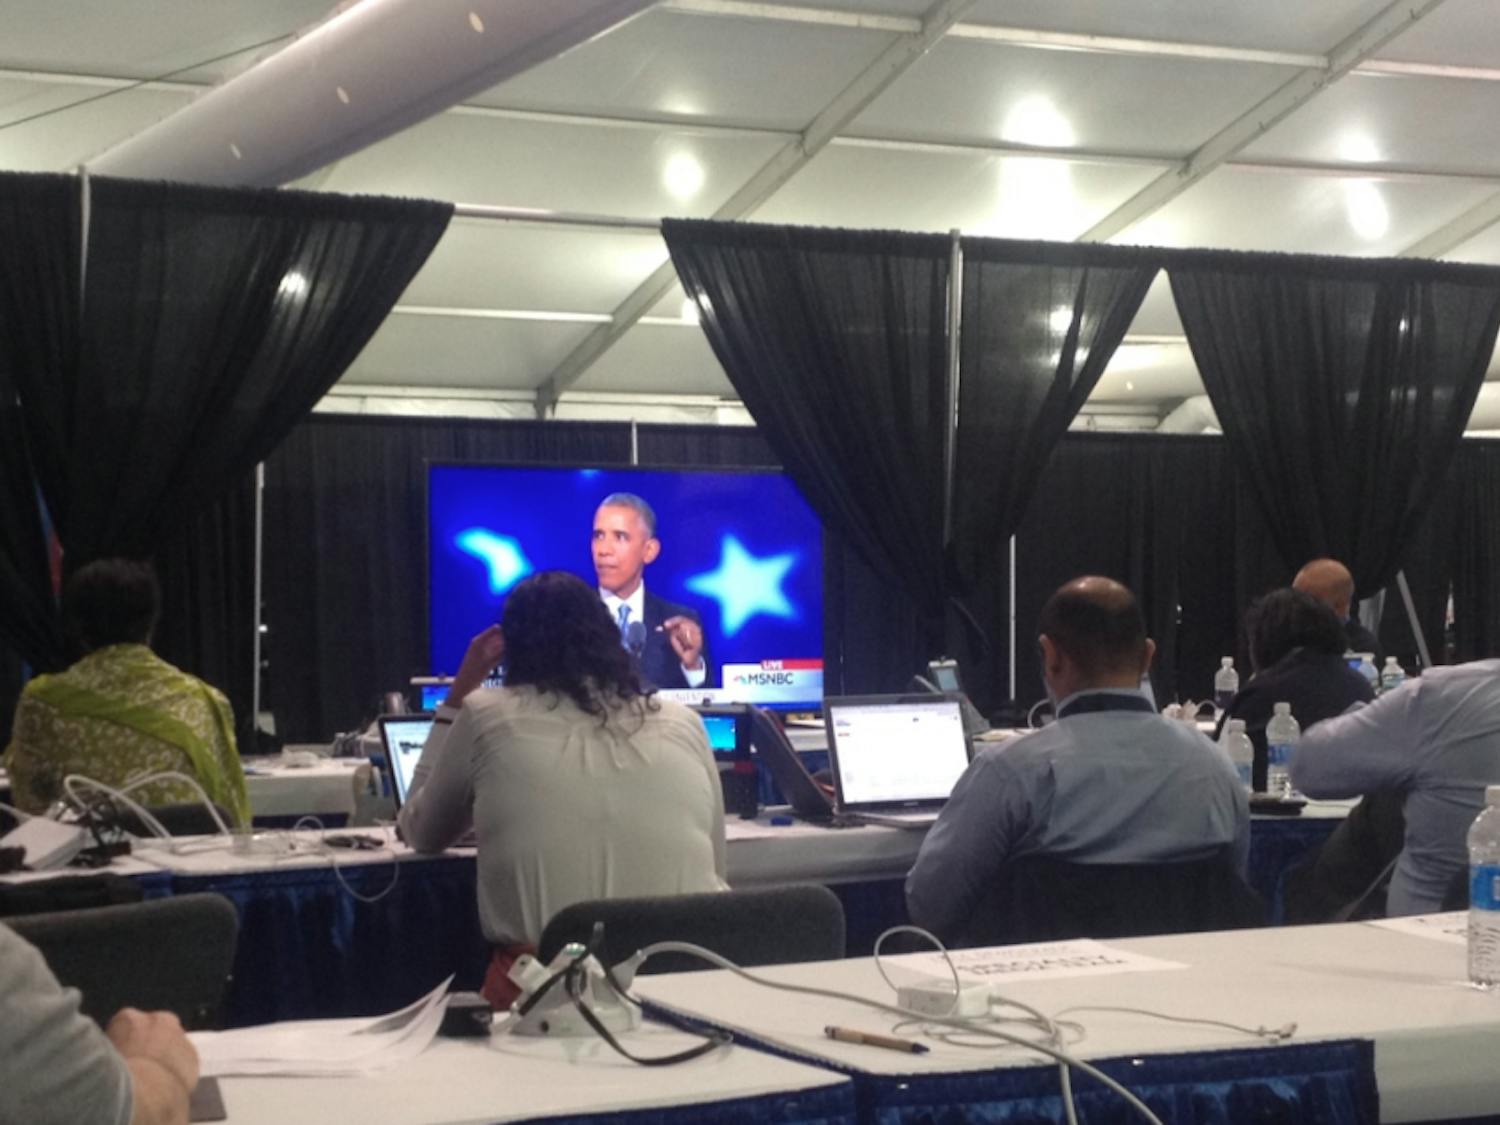 Reporters inside the media center watch remarks from President Barack Obama at the Democratic National Convention in Philadelphia on July 27, 2016.